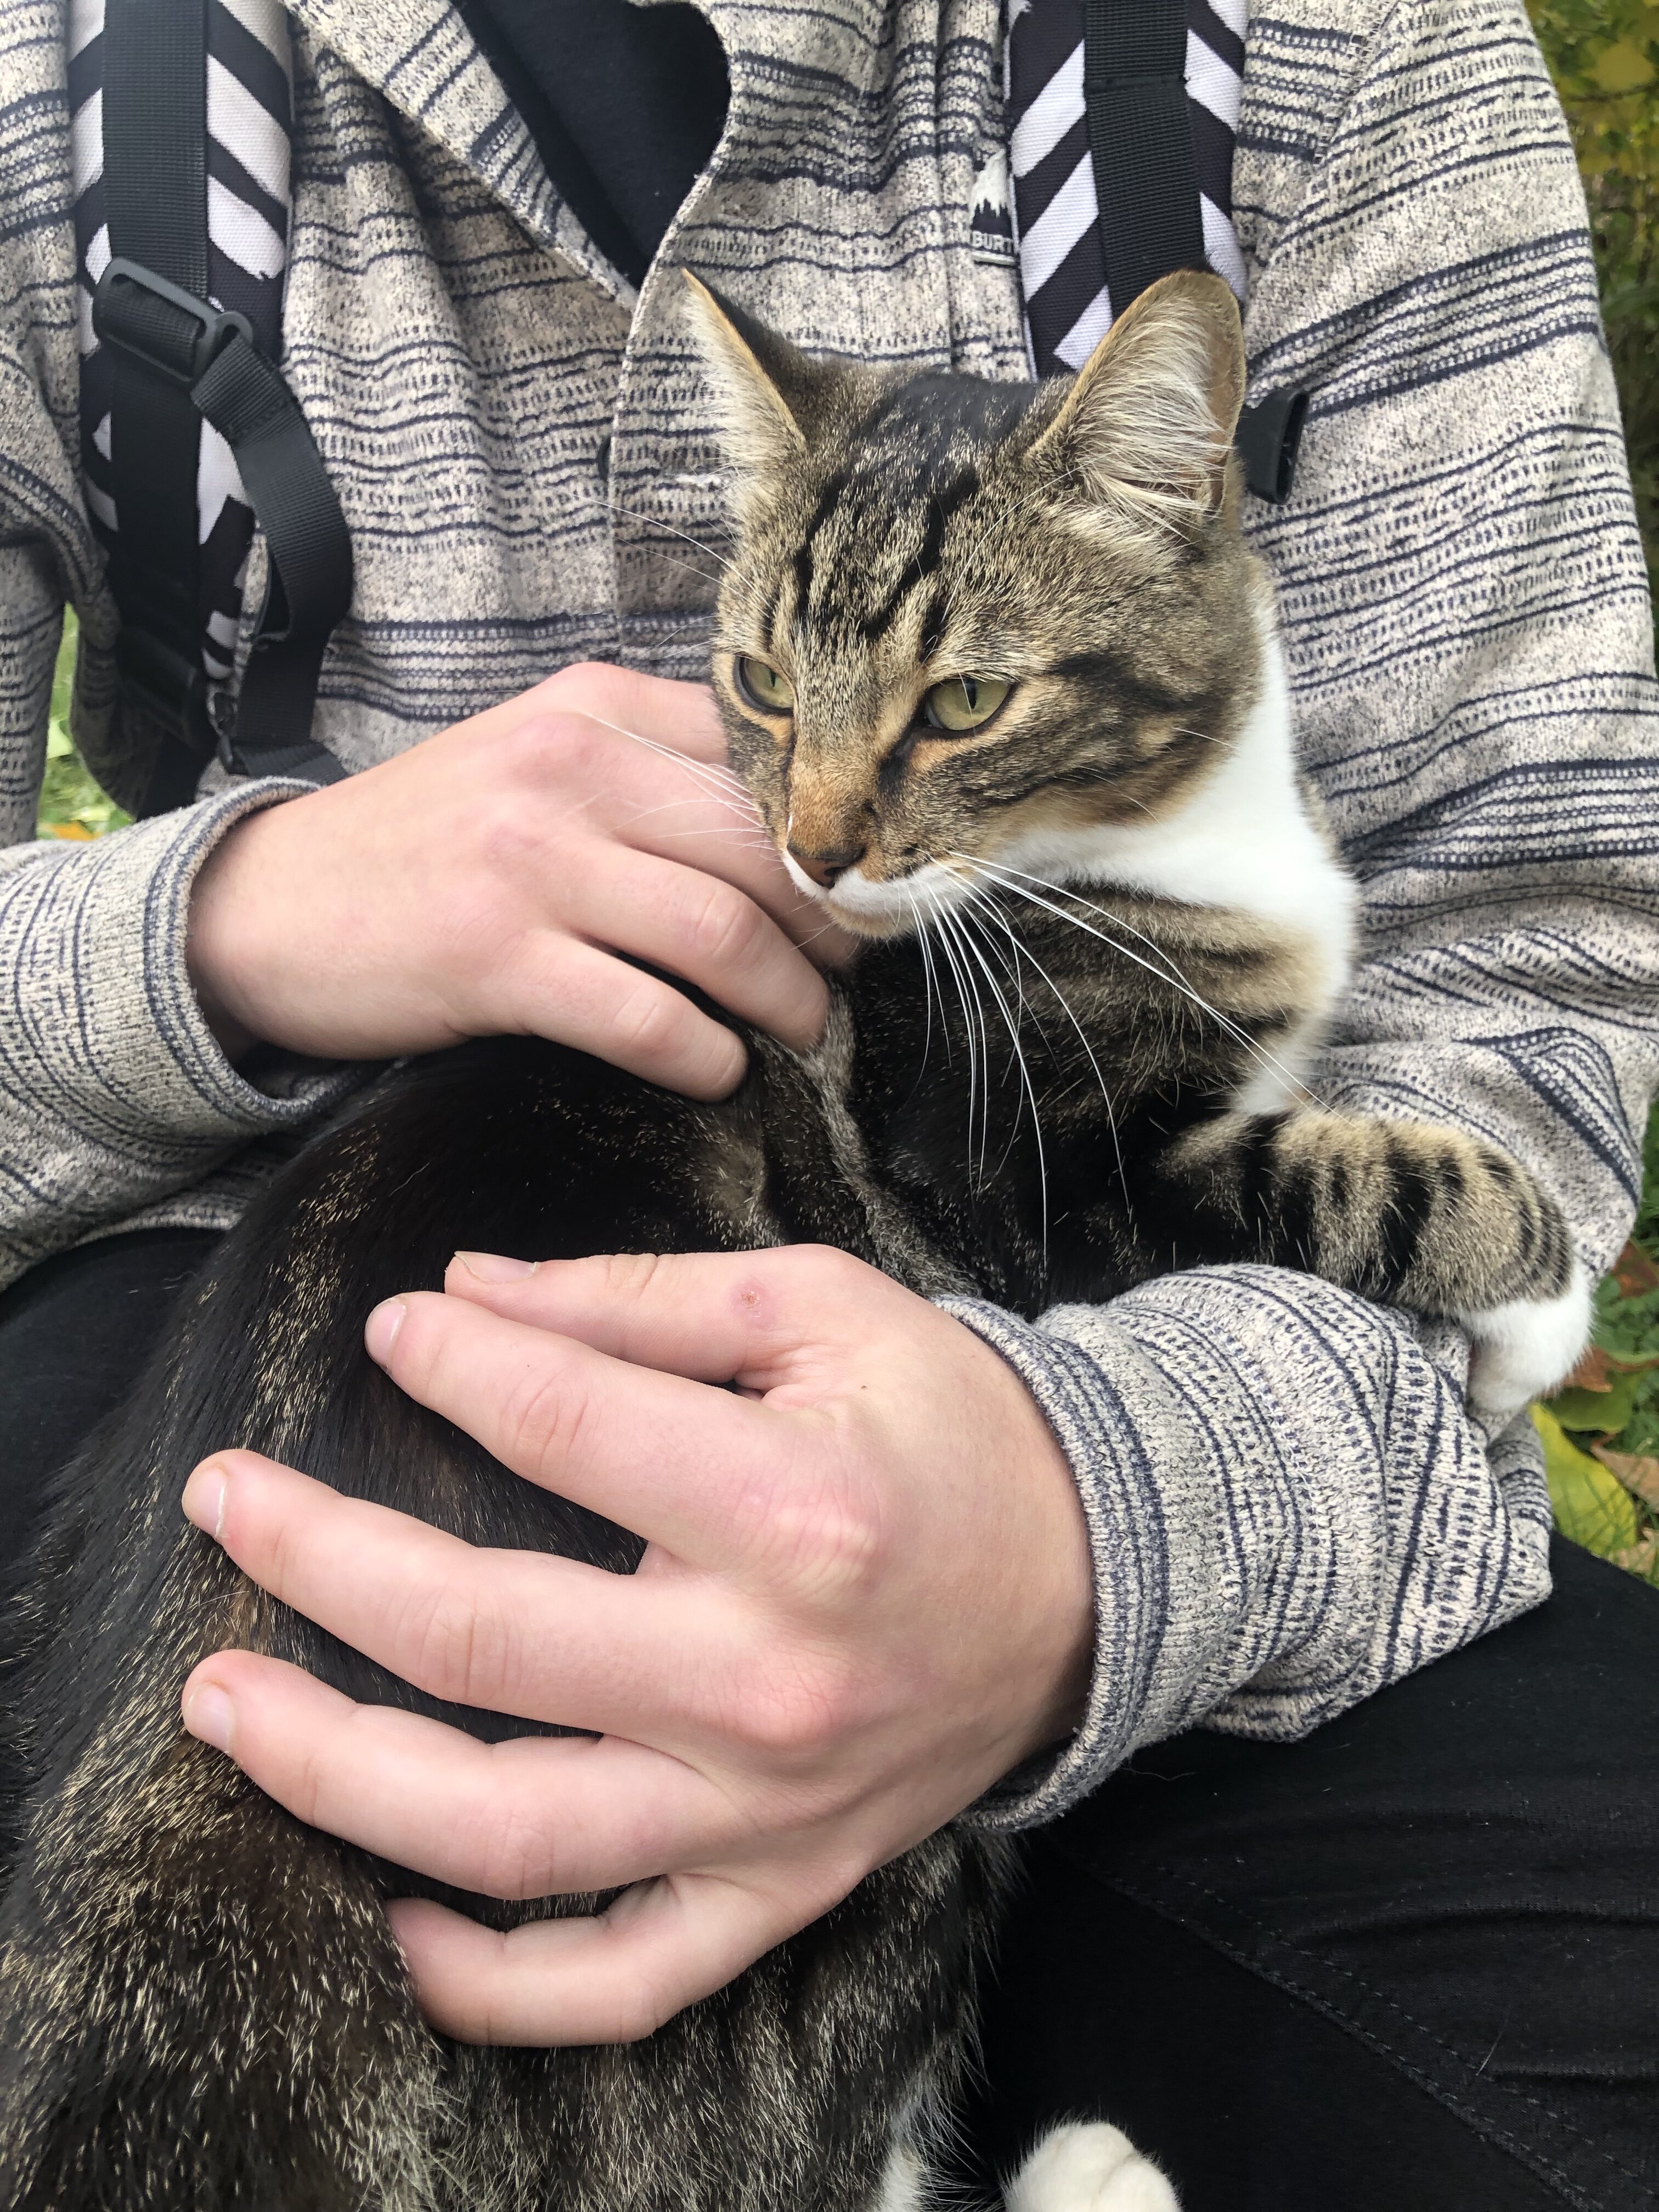 Campus cat goes by many names, brings students together